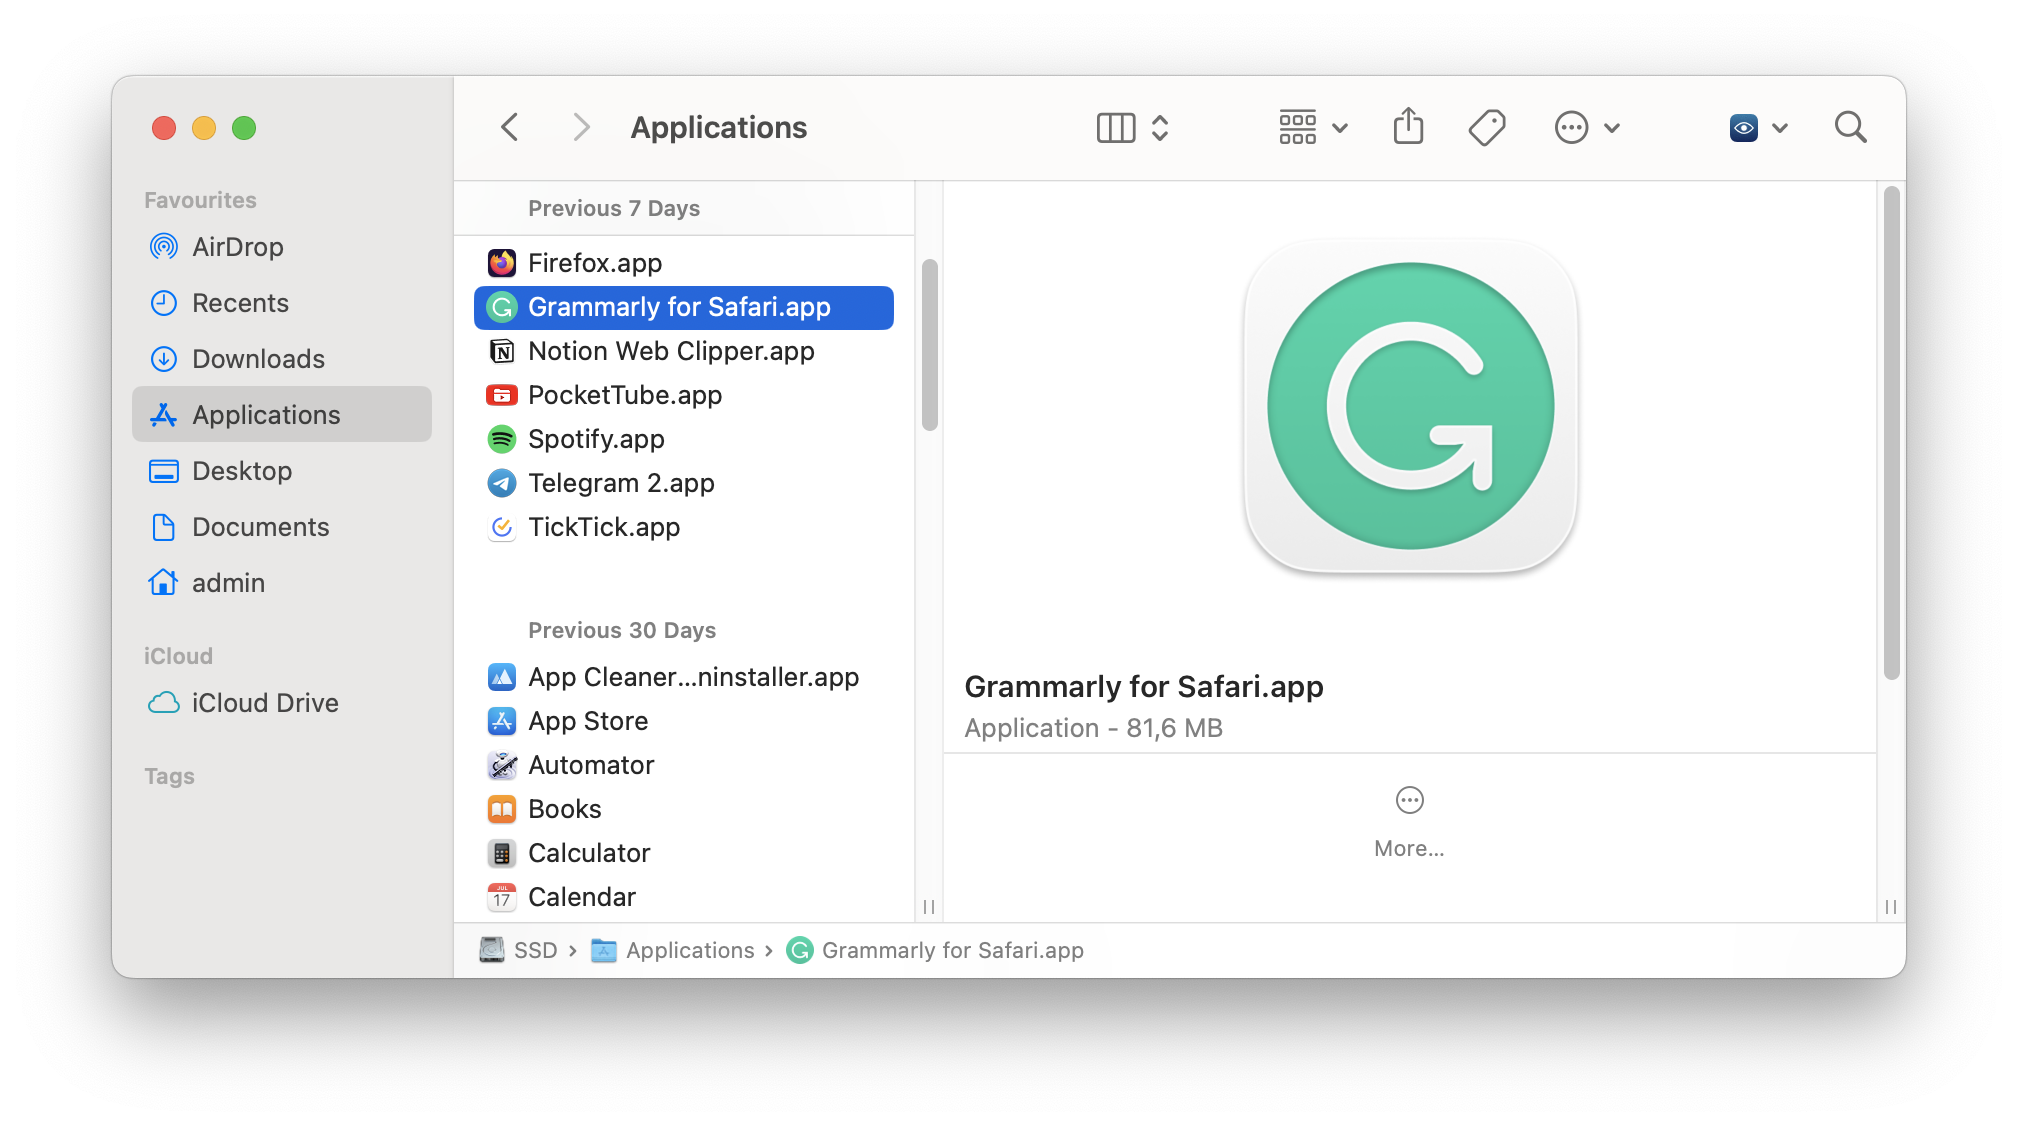 Grammarly for Safari application in Finder